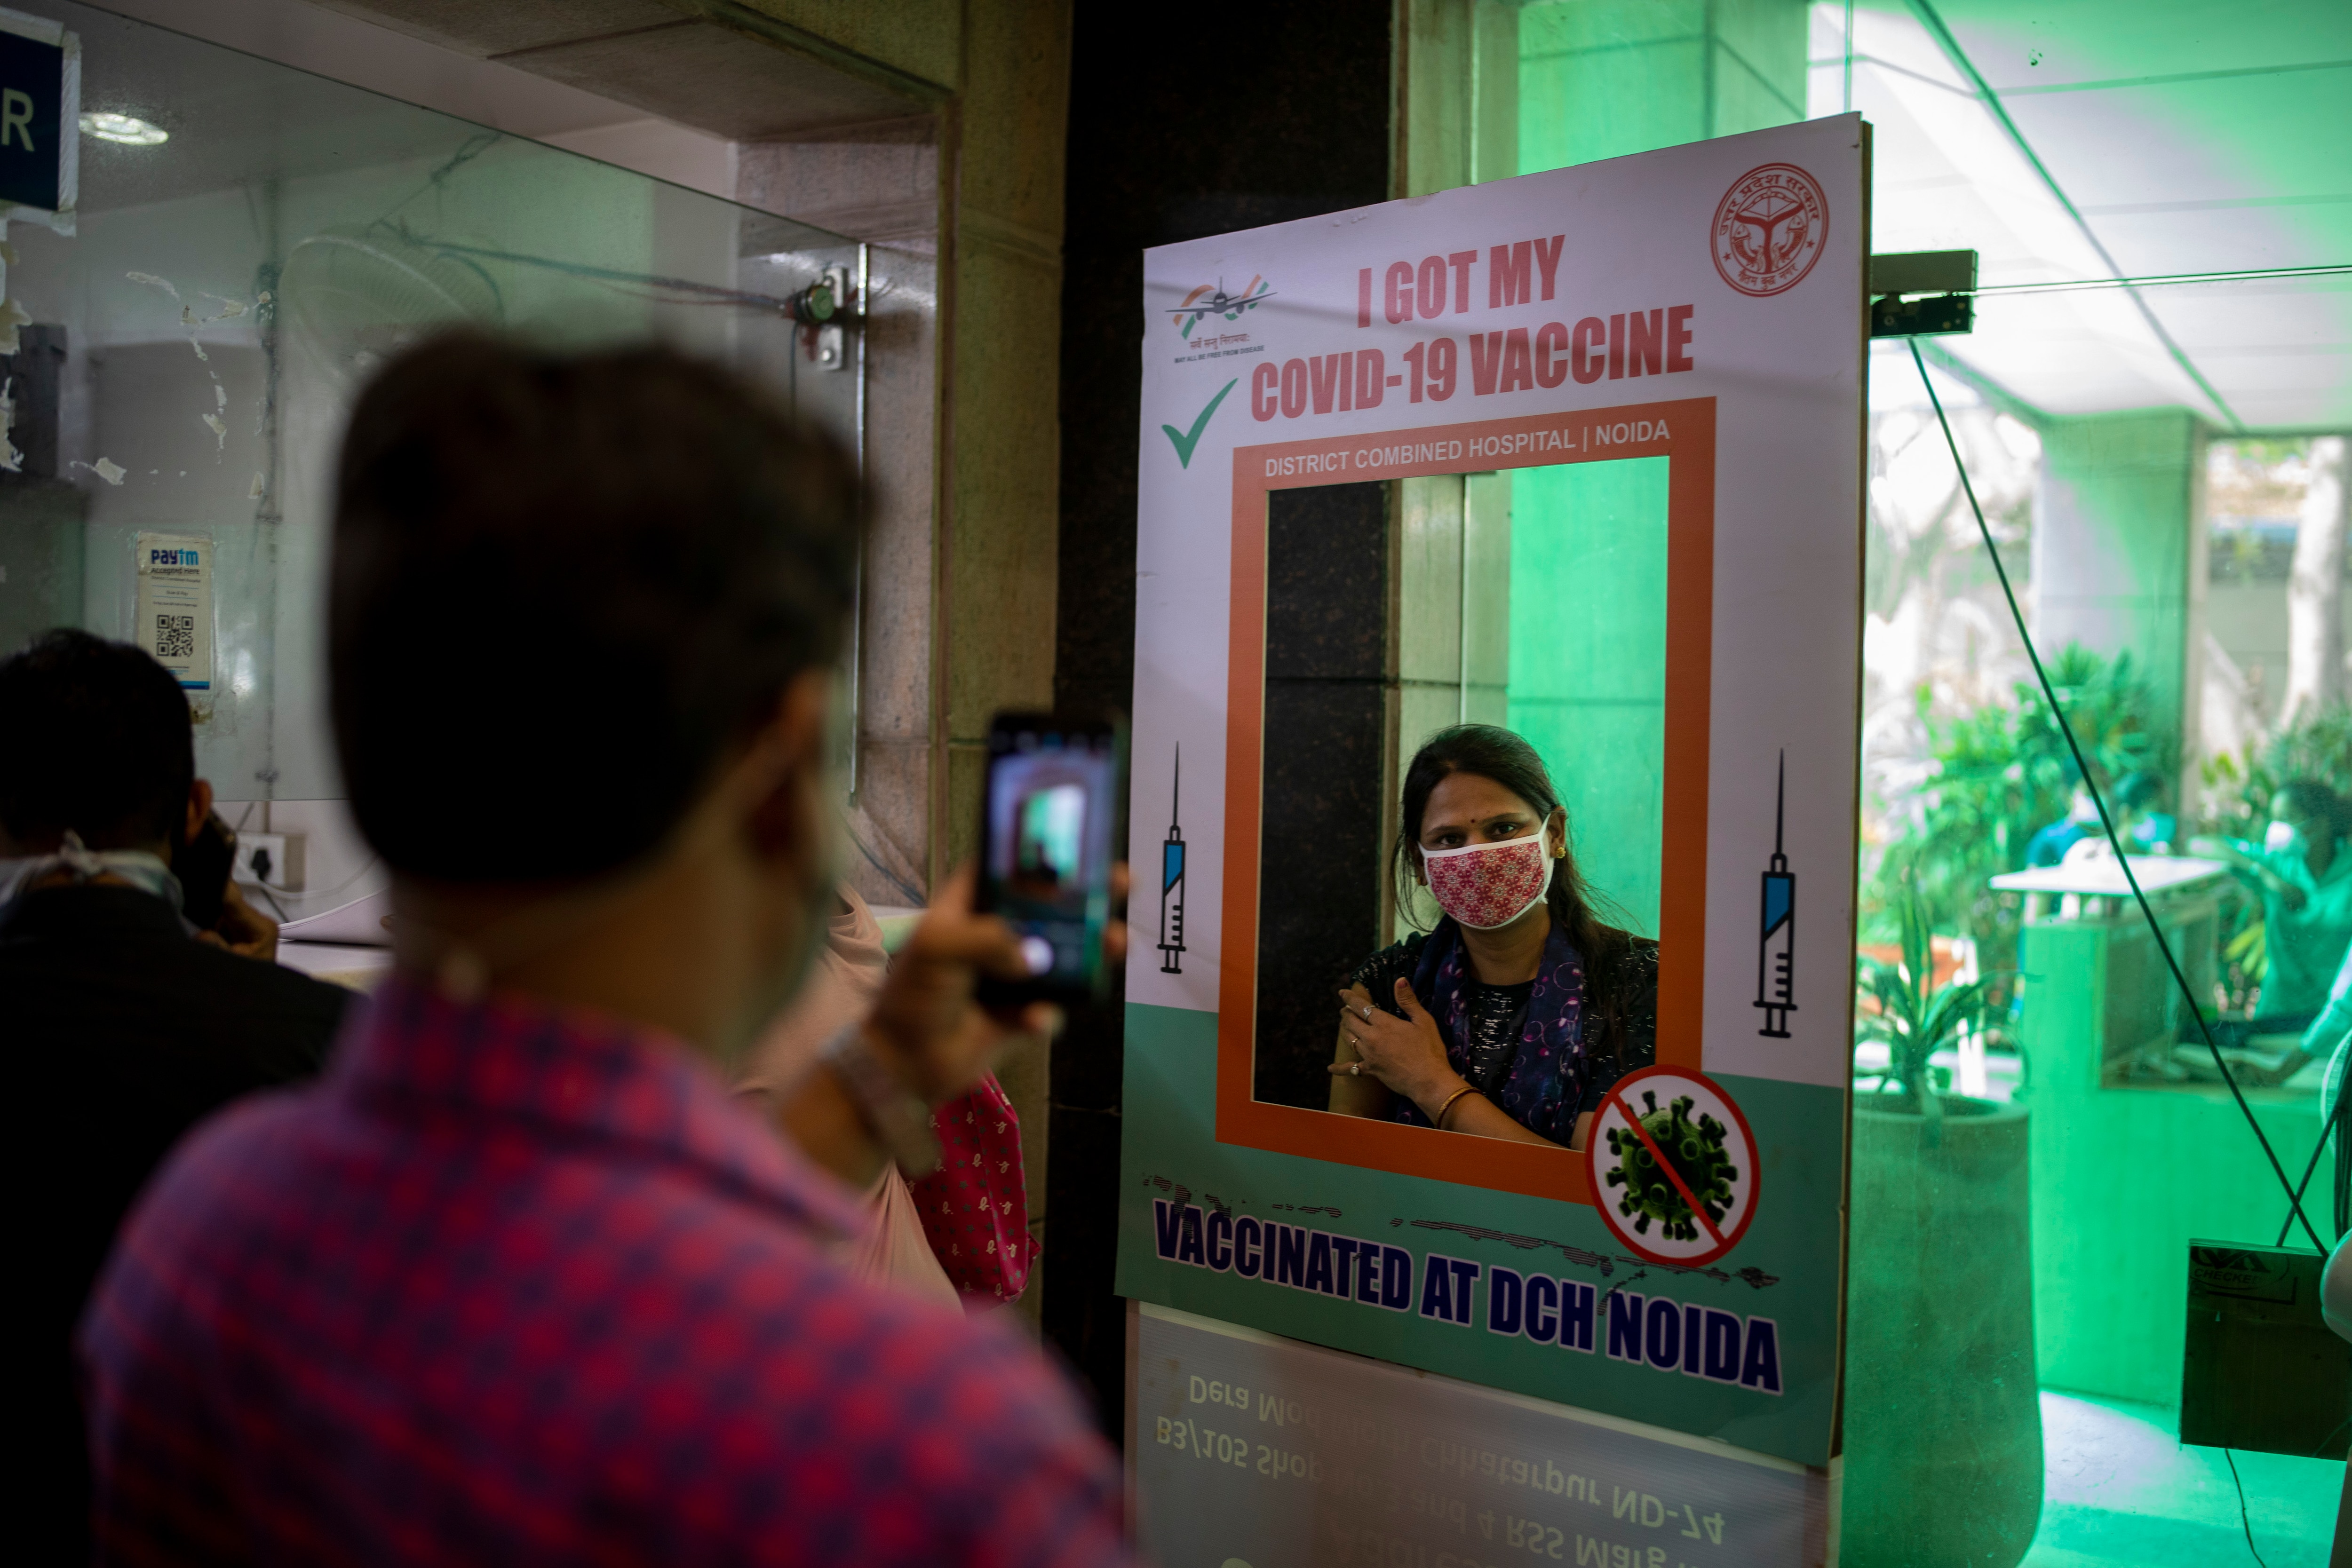 A woman poses behind a cutout after receiving a Covishield vaccine in India.